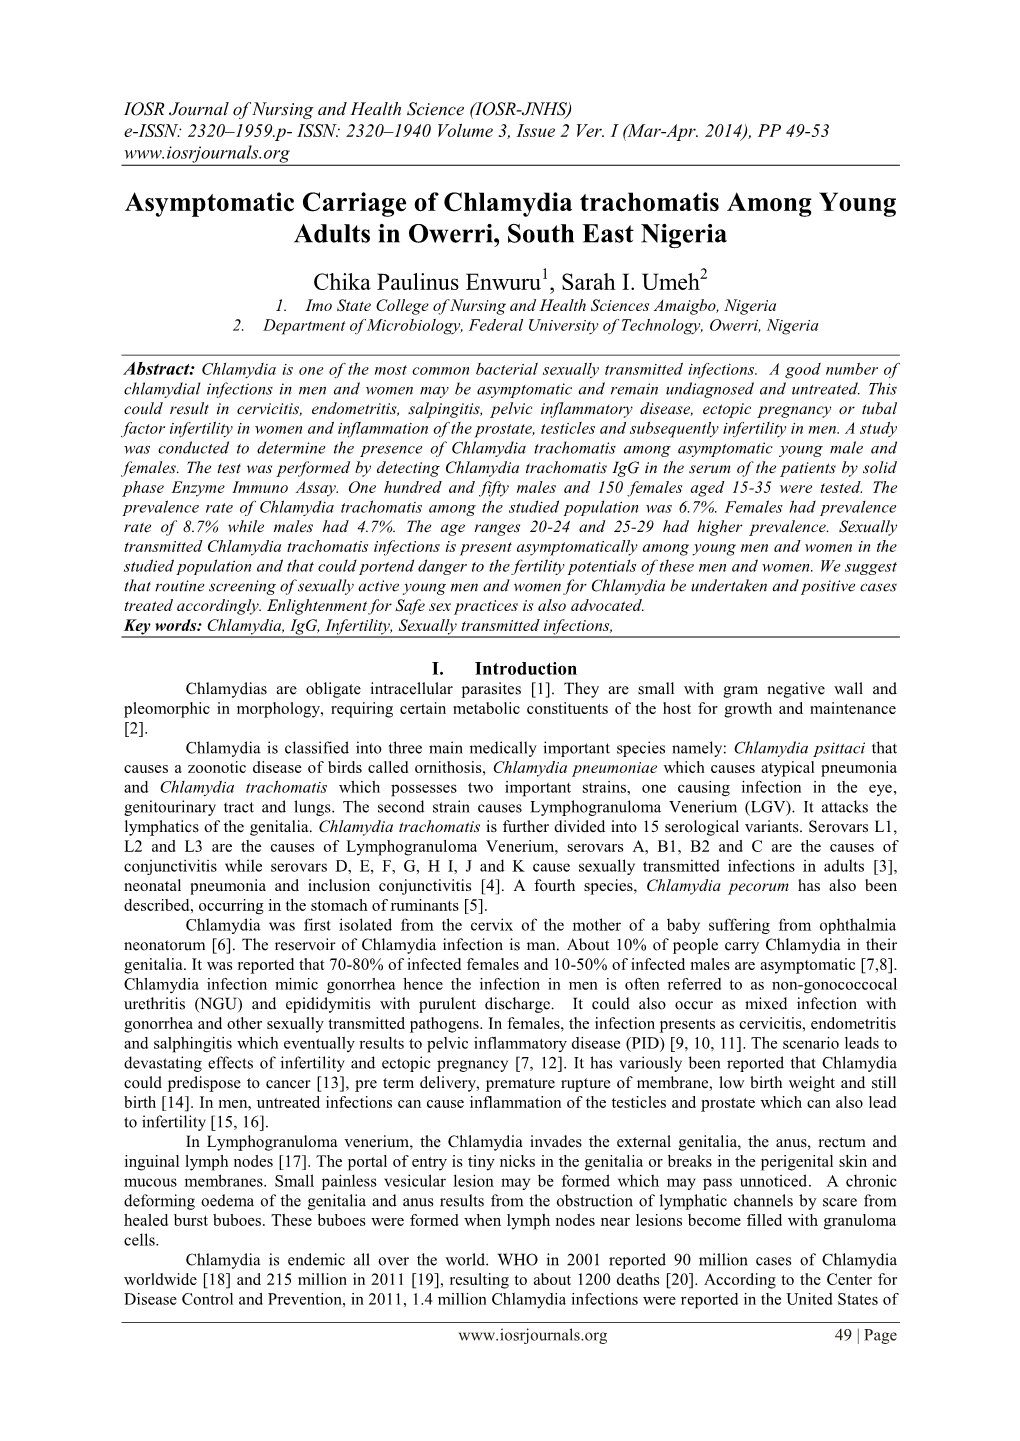 Asymptomatic Carriage of Chlamydia Trachomatis Among Young Adults in Owerri, South East Nigeria